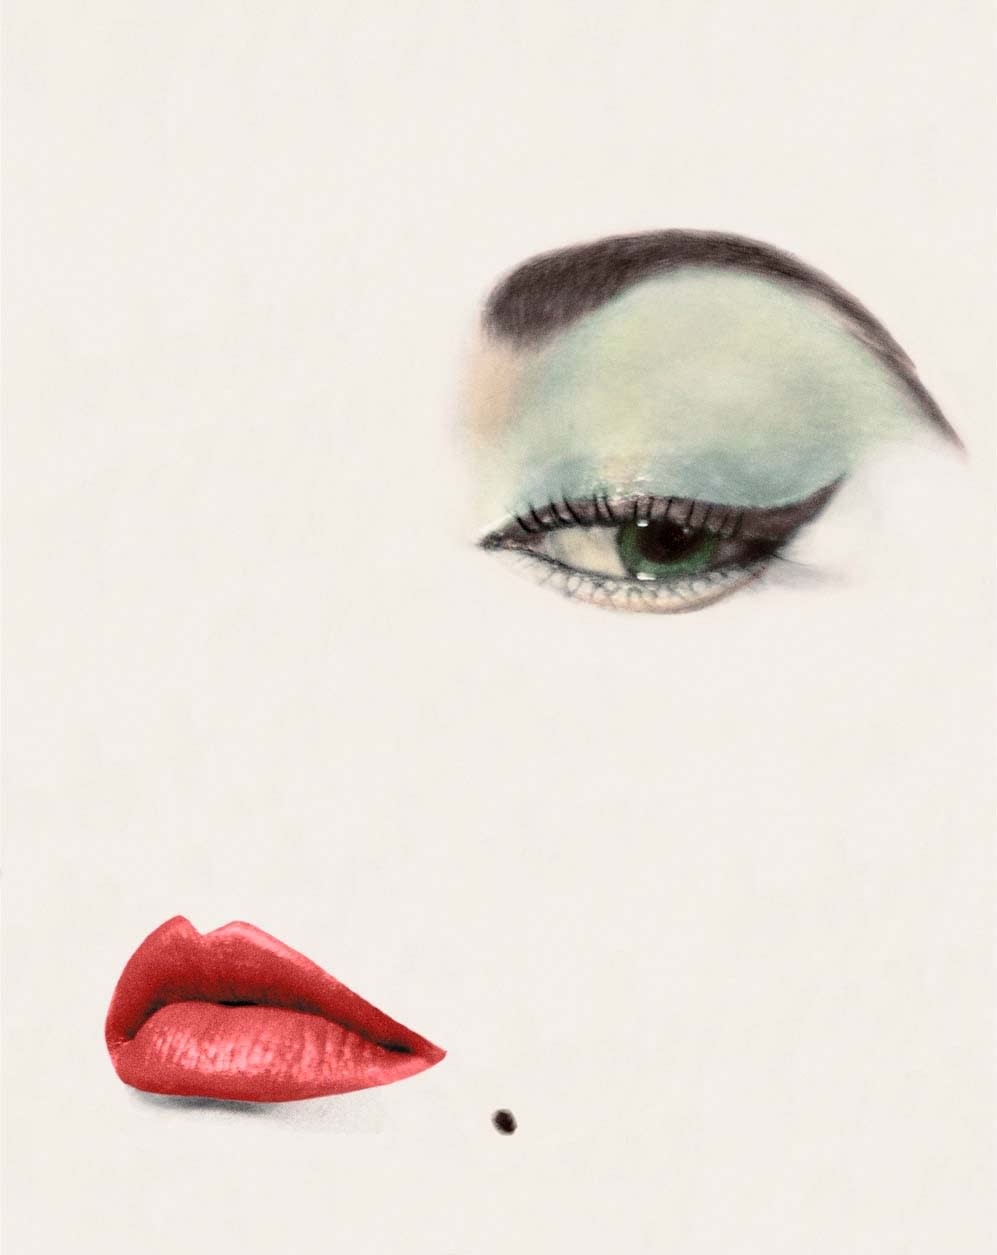 Erwin Blumenfeld photograph of model Jean Patchett's face with only eye, lips, and beauty mark